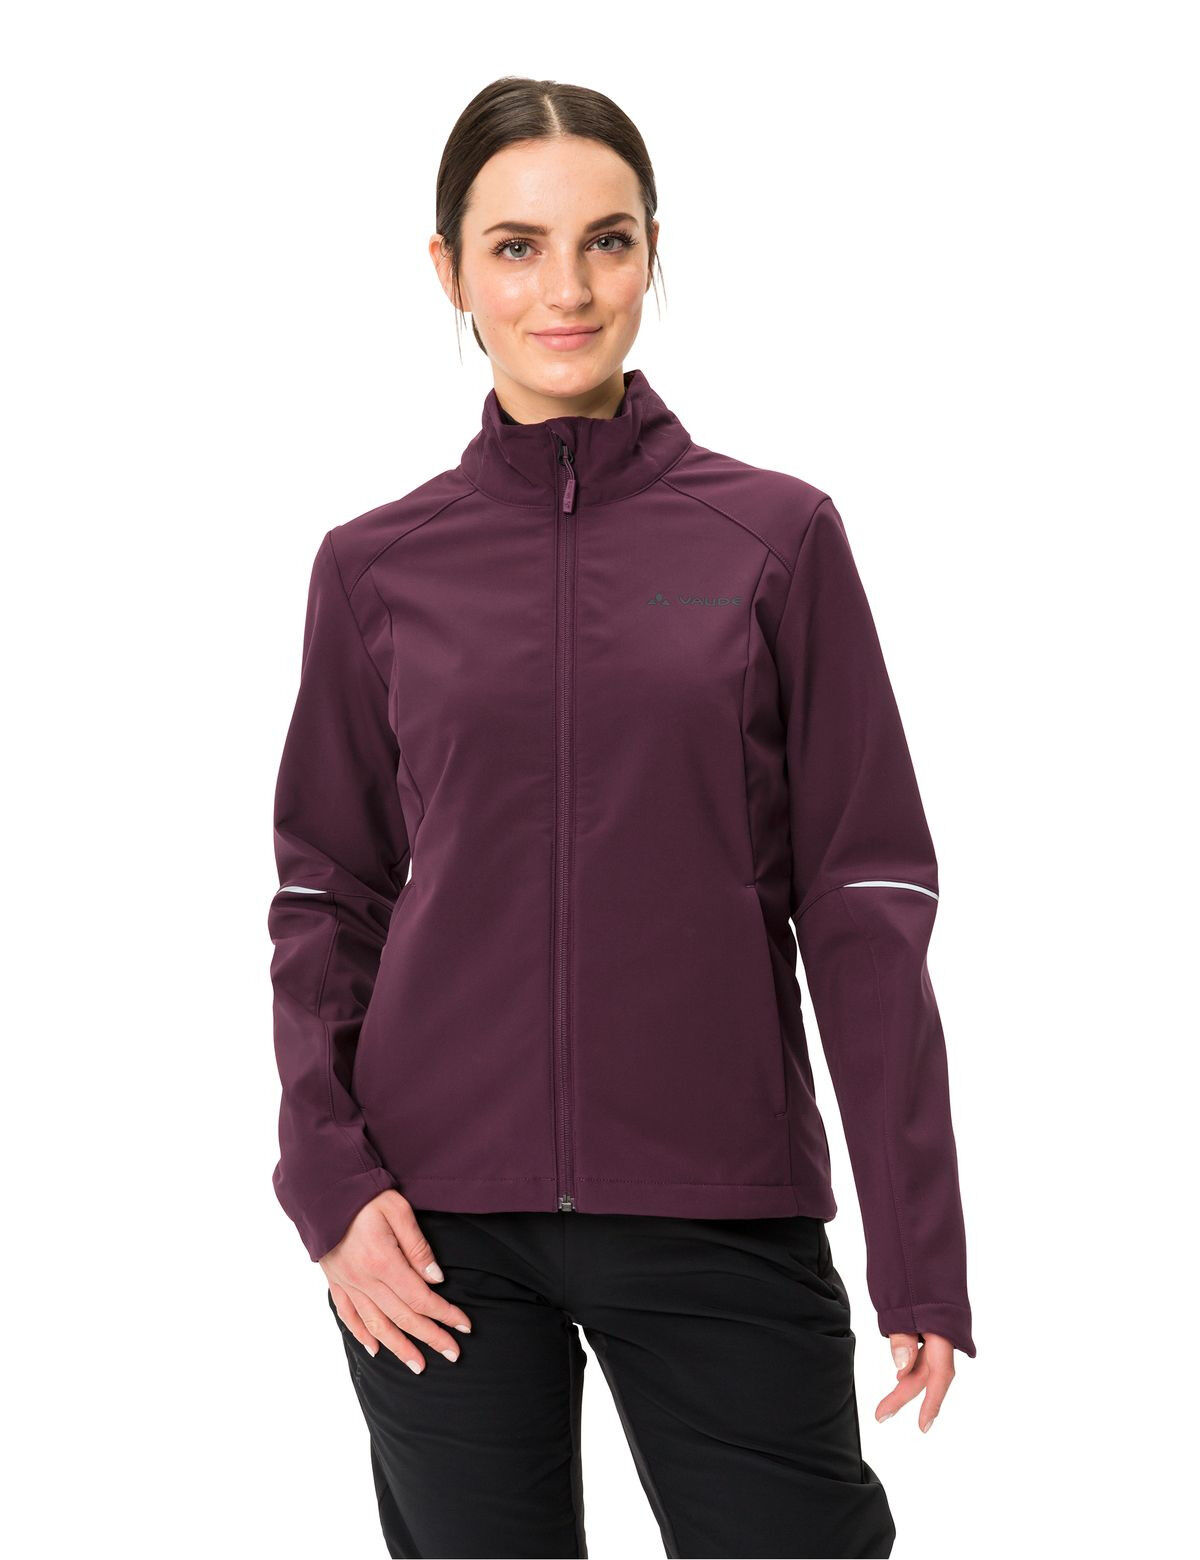 Vaude Wintry Jacket IV - Giacca ciclismo - Donna | Hardloop